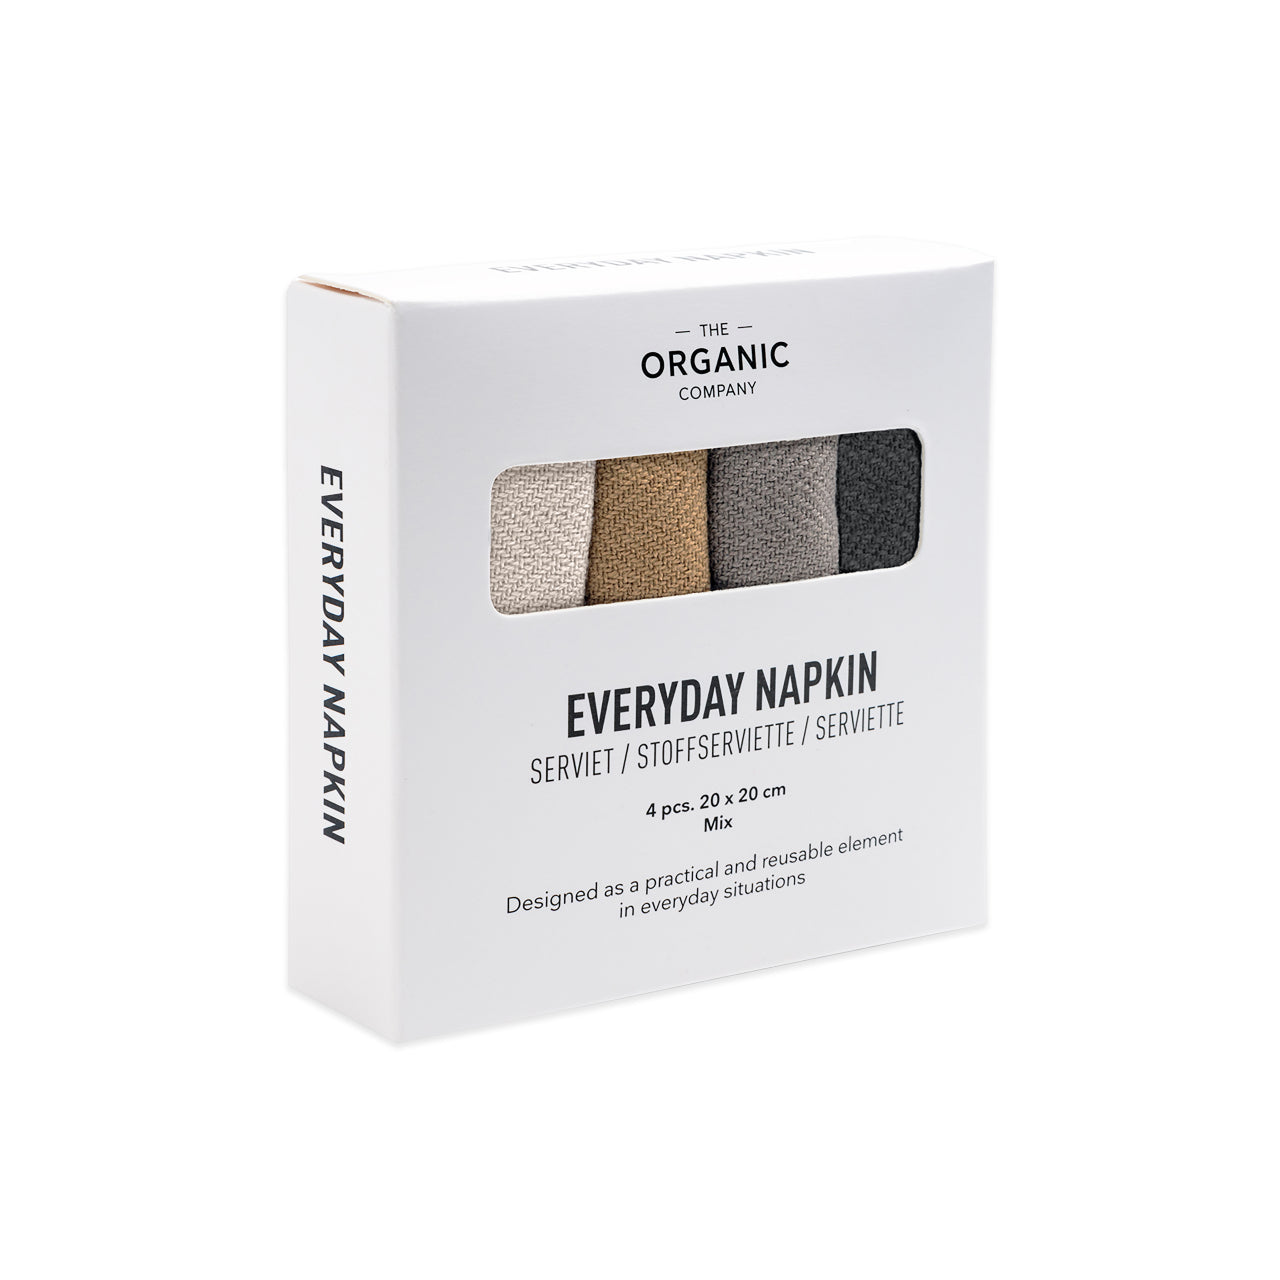 Stofservietter Everyday Napkin 4 pack Mix fra The Organic Company, Oliviers & Co